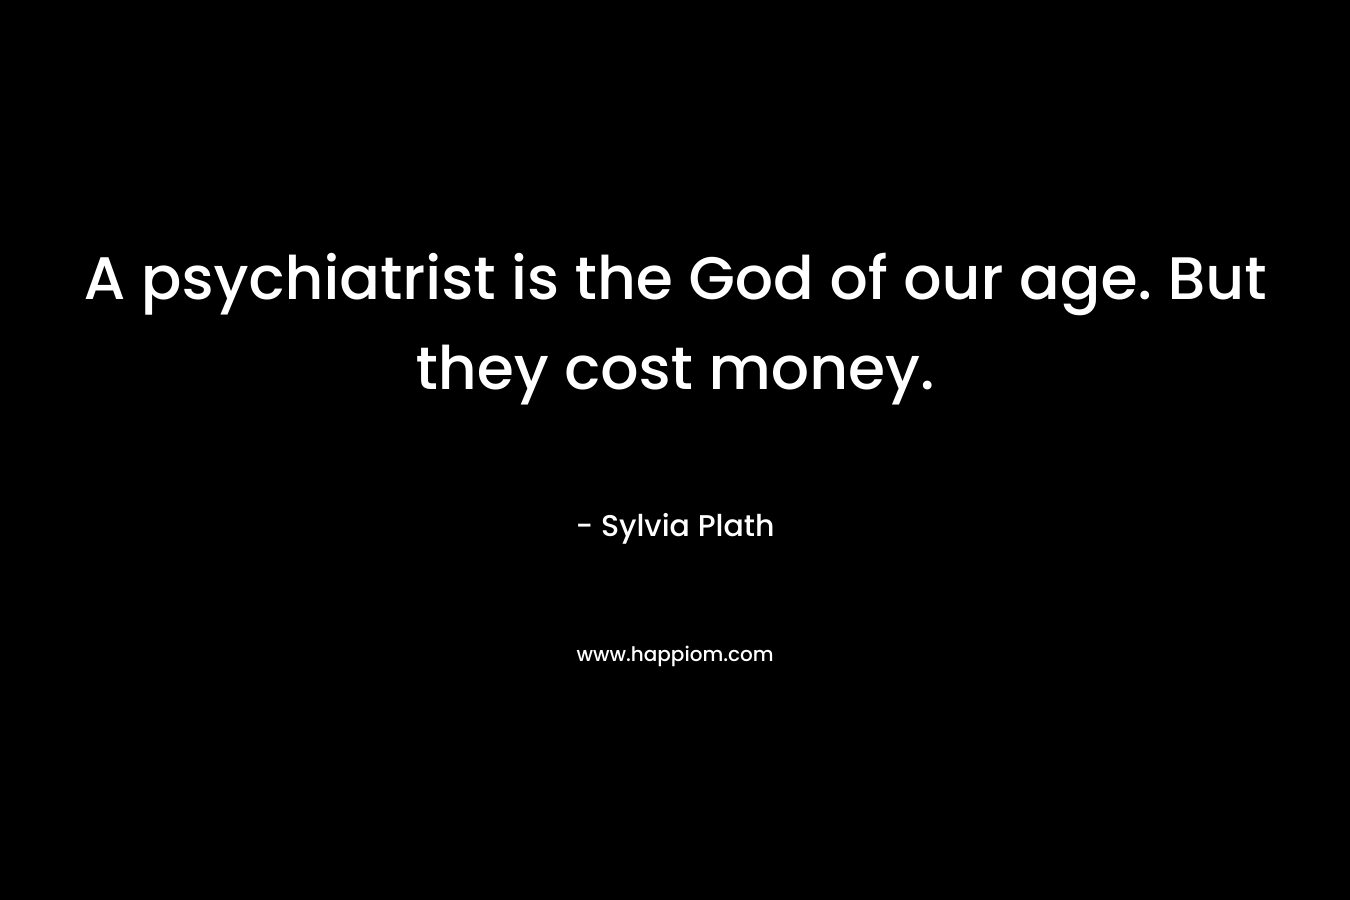 A psychiatrist is the God of our age. But they cost money. – Sylvia Plath